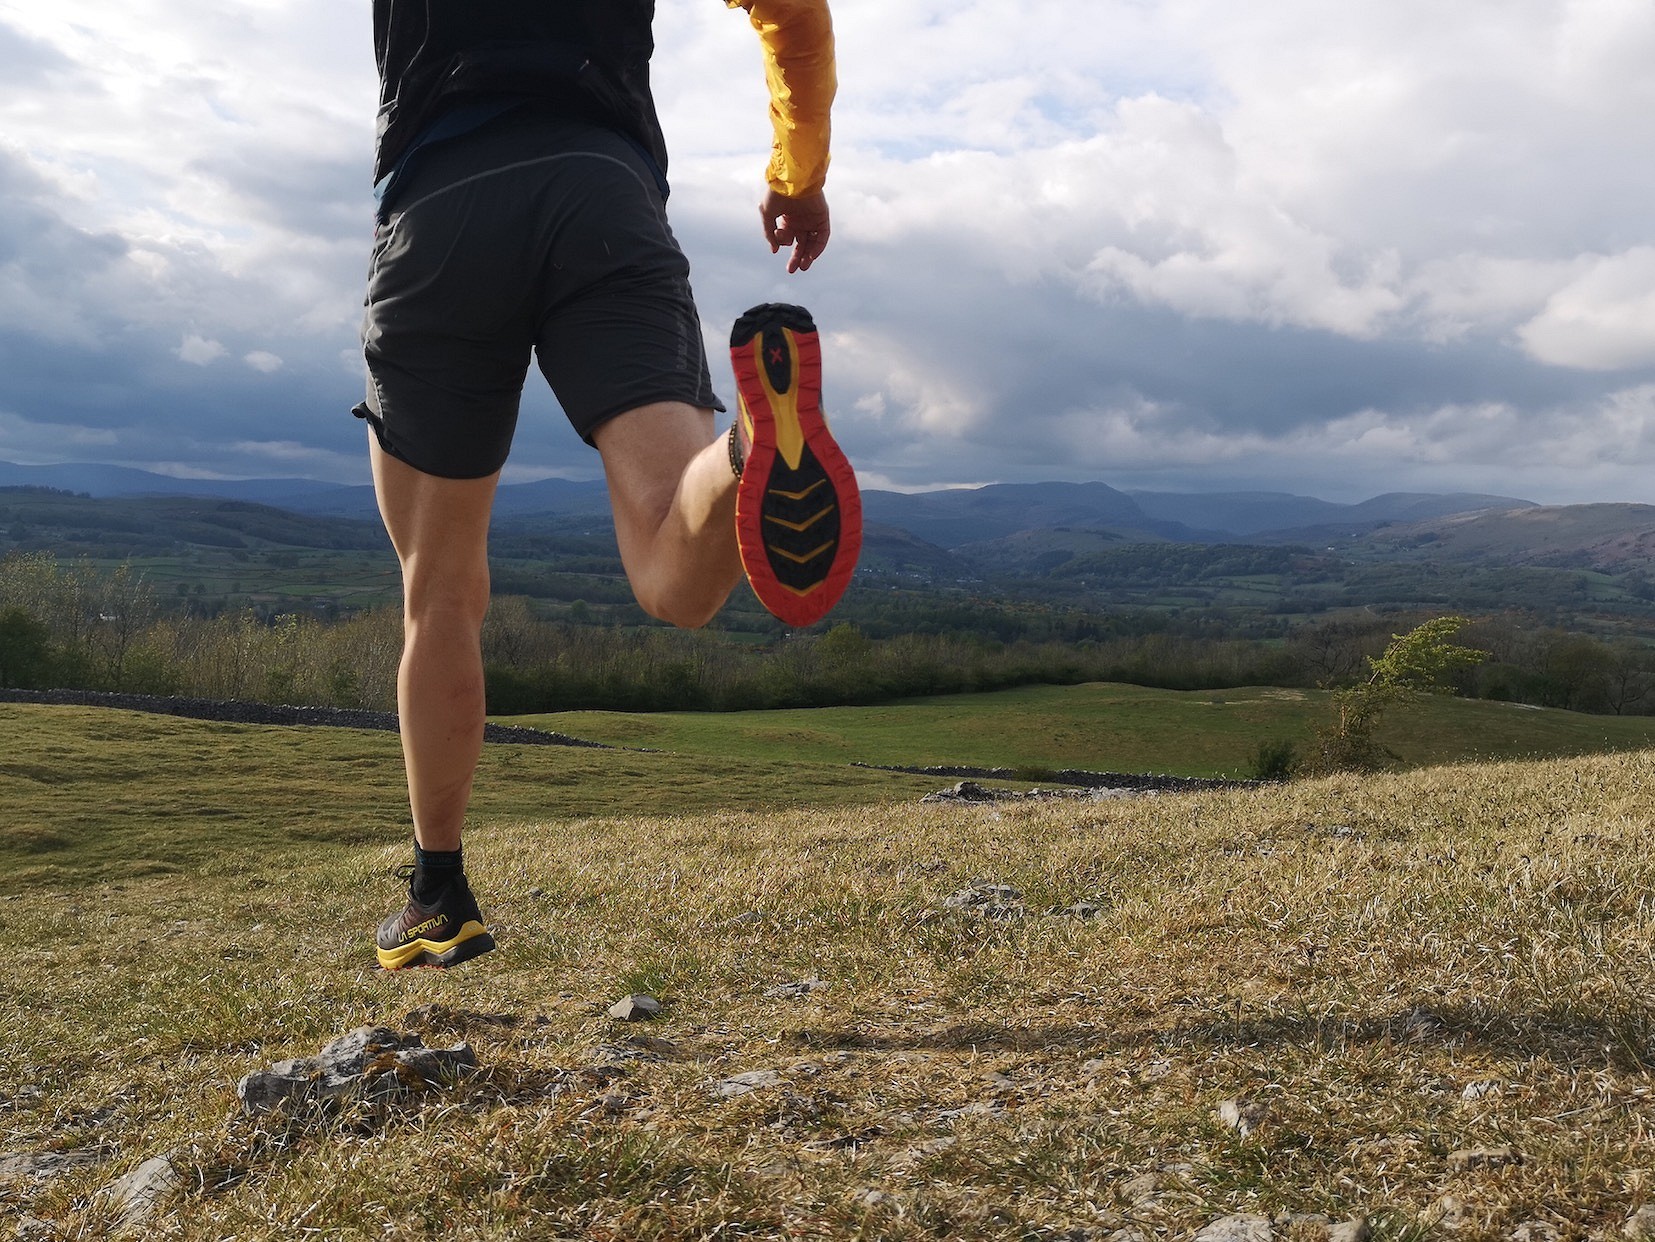 The La Sportiva Jackal is a mountain running shoe dedicated to off-road running over ultra distances  © Jacob Snochowski